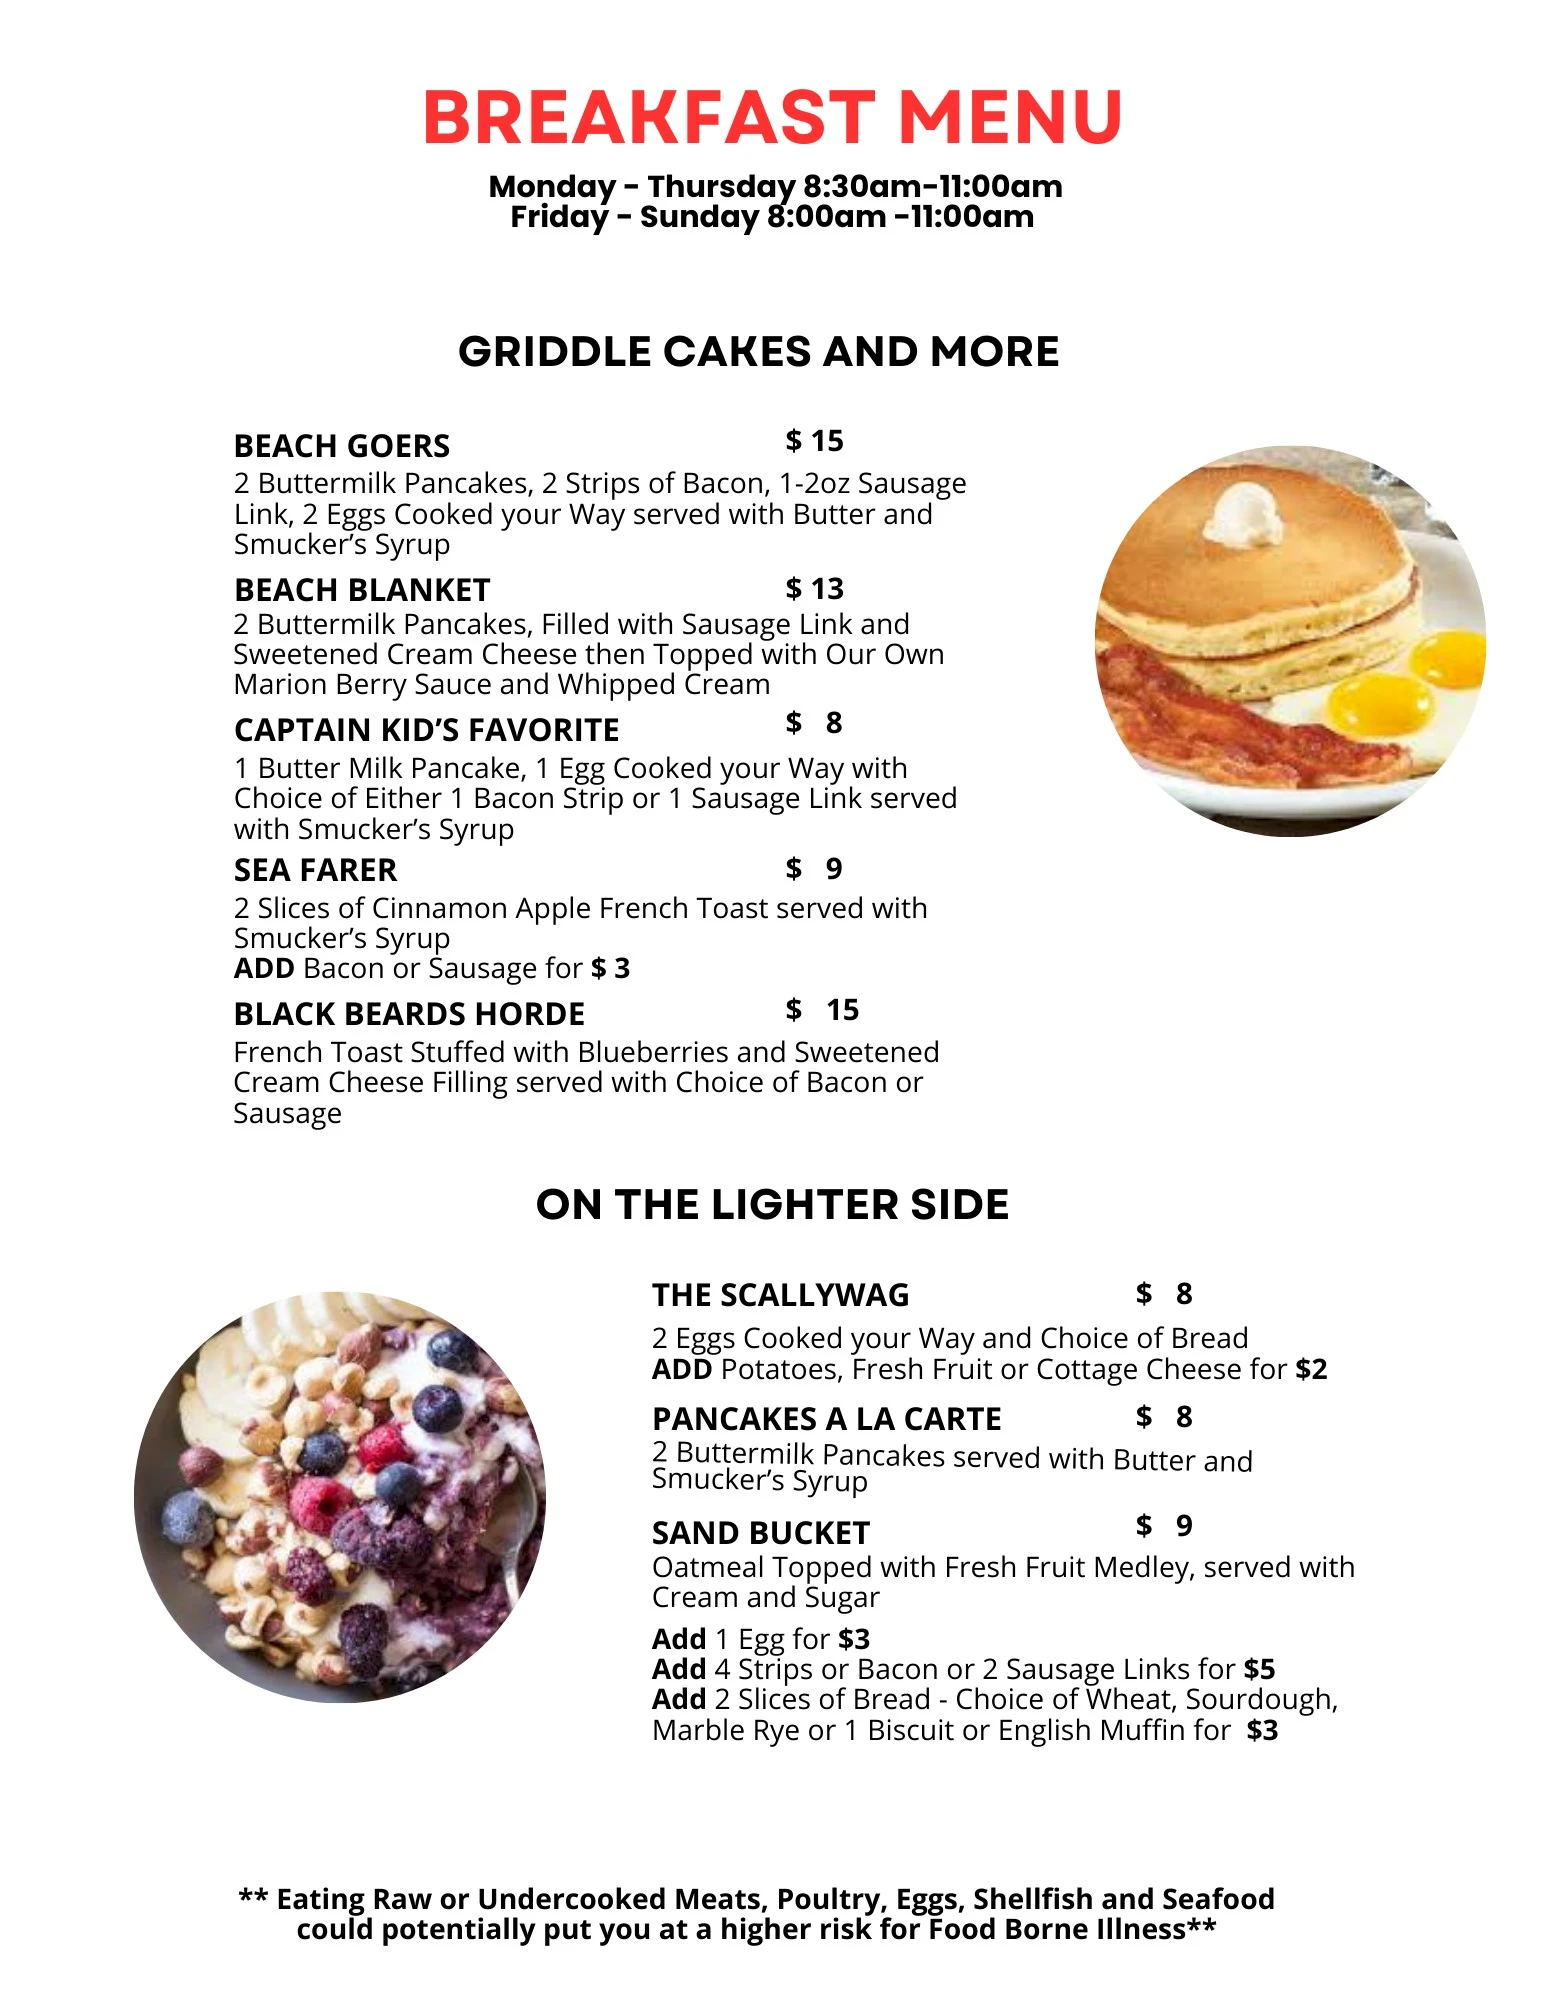 This is a breakfast menu offering pancakes, specialty French toast and light appetite options.